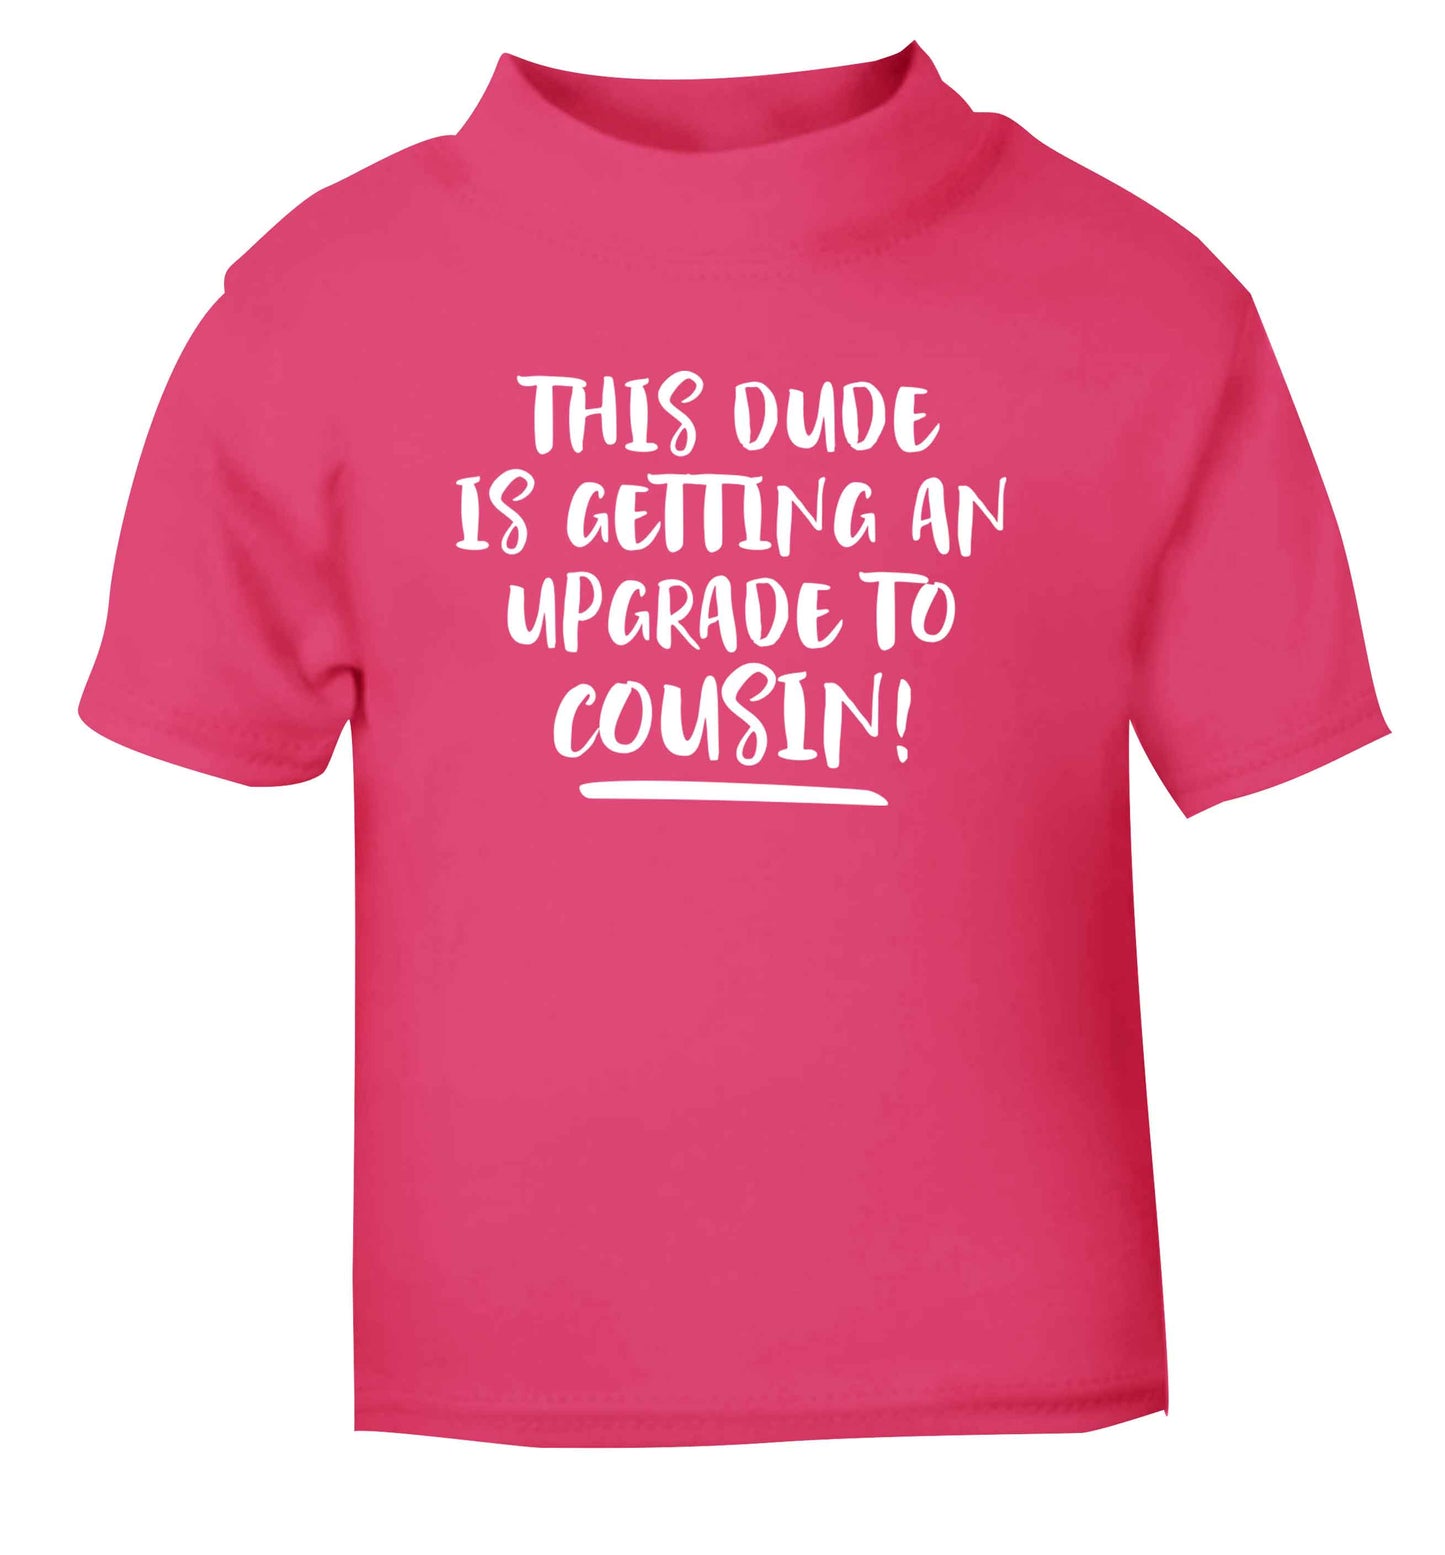 This dude is getting an upgrade to cousin! pink Baby Toddler Tshirt 2 Years